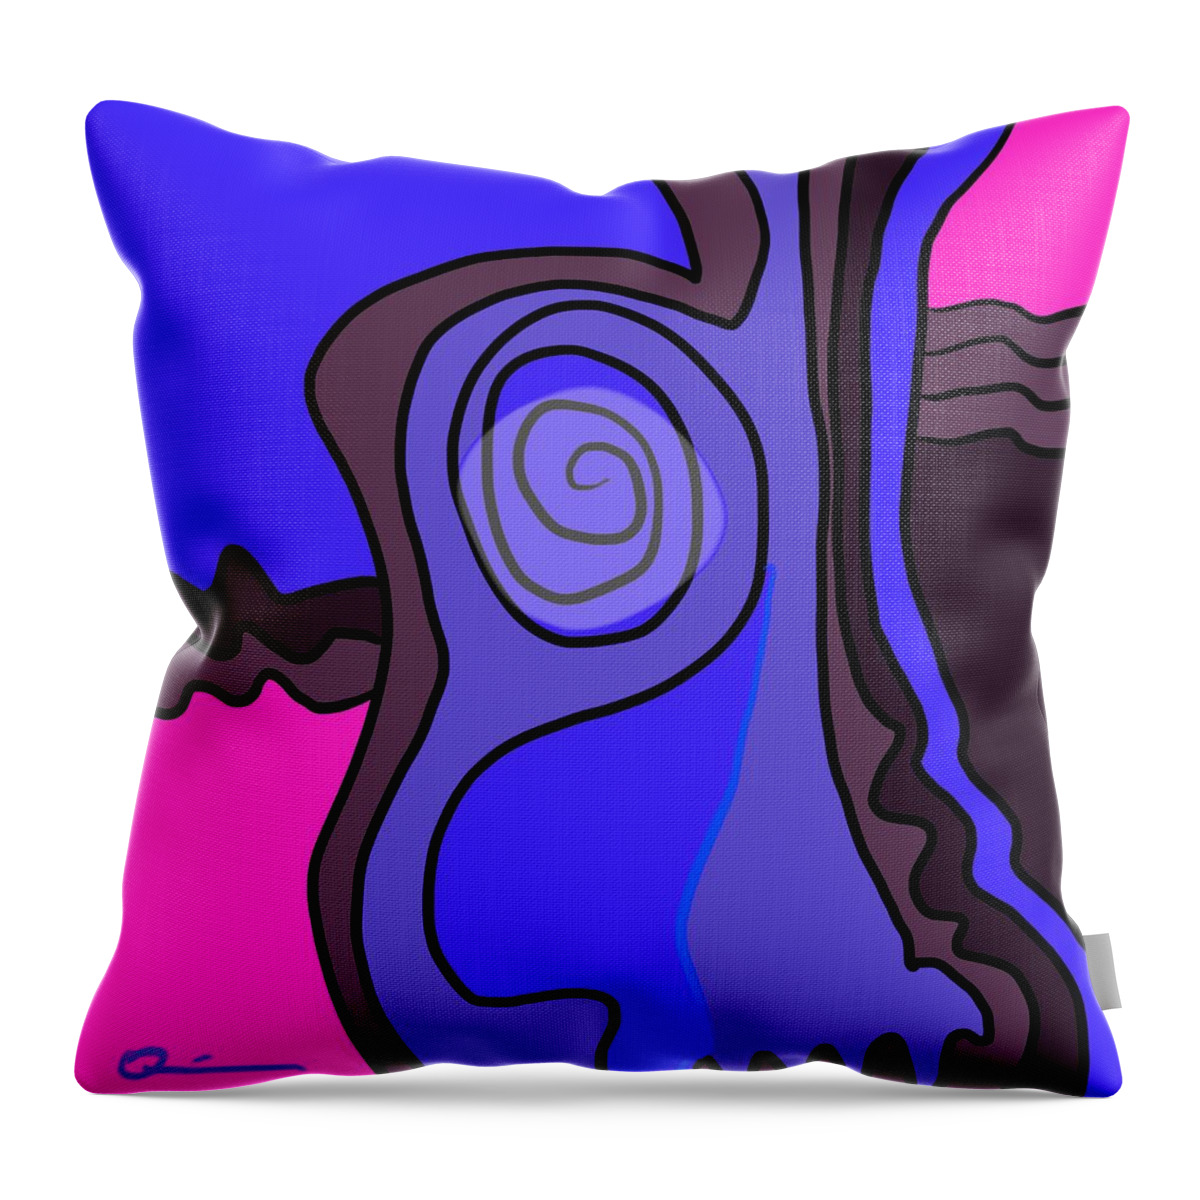 Quiros Throw Pillow featuring the digital art Knot by Jeffrey Quiros